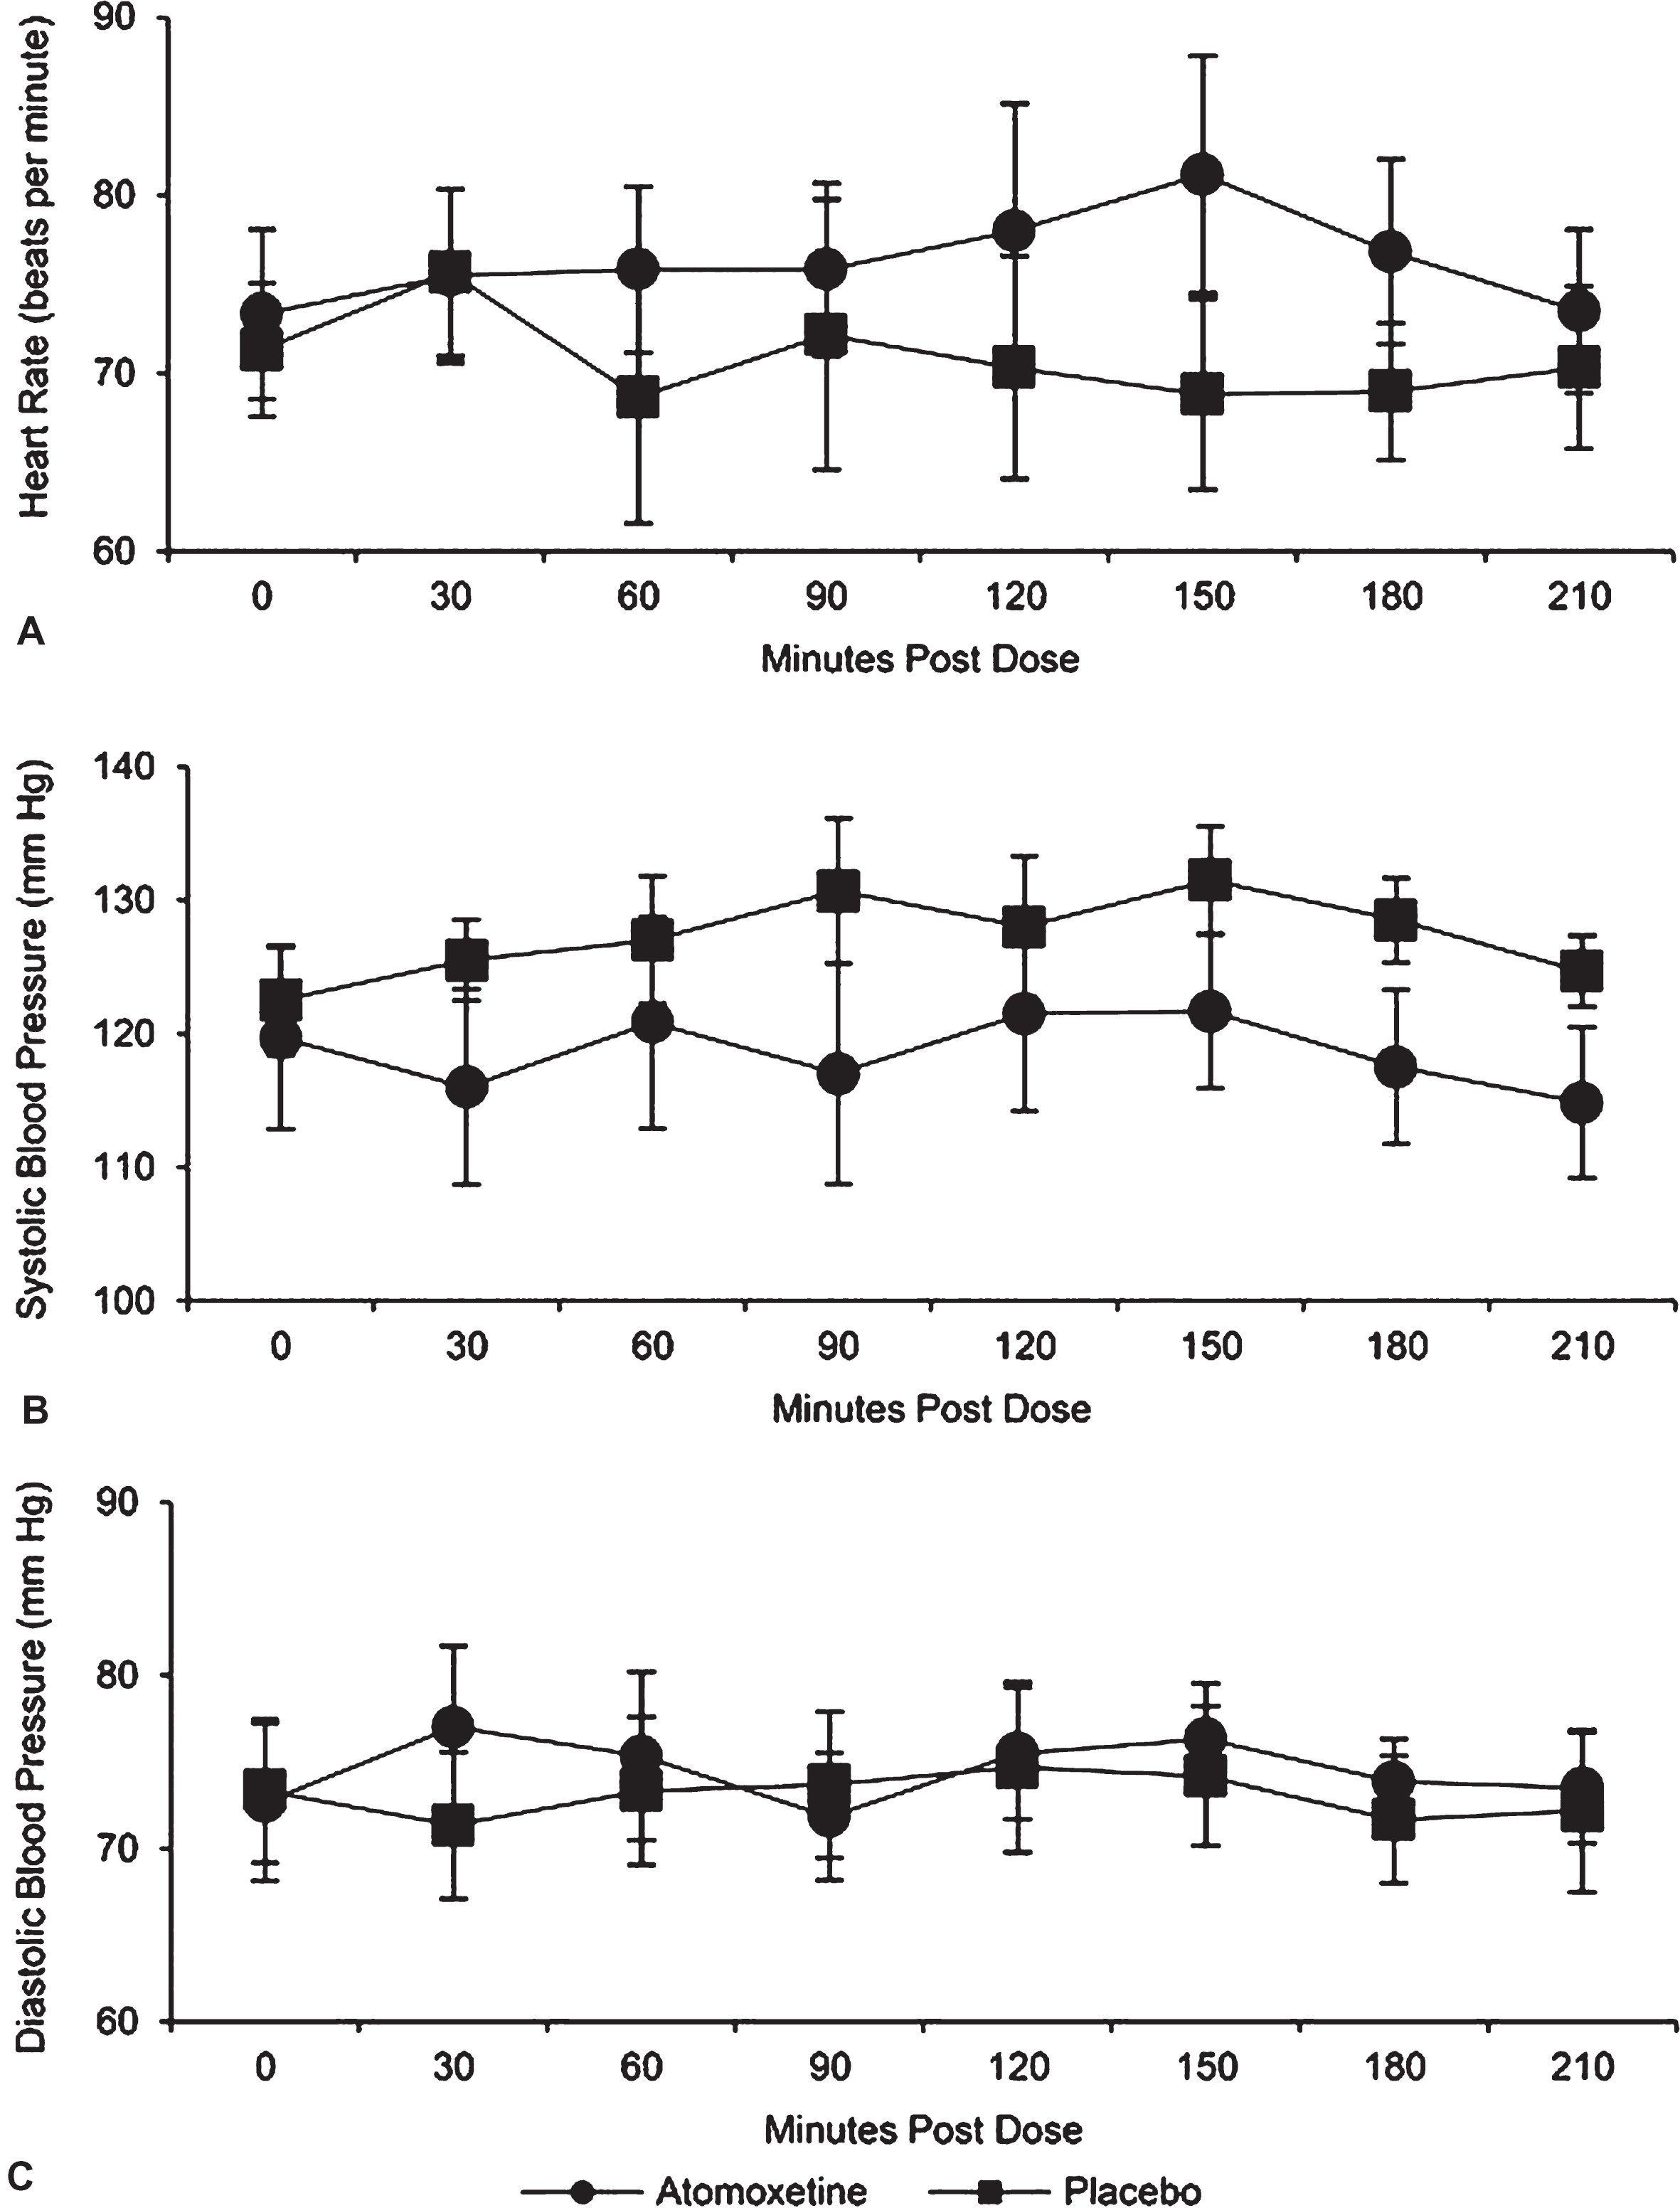 Vital signs by group as a function of time post dose. 
No significant between-groups differences were evident for (A) heart rate, 
(B) systolic blood pressure, or (C) diastolic blood pressure.